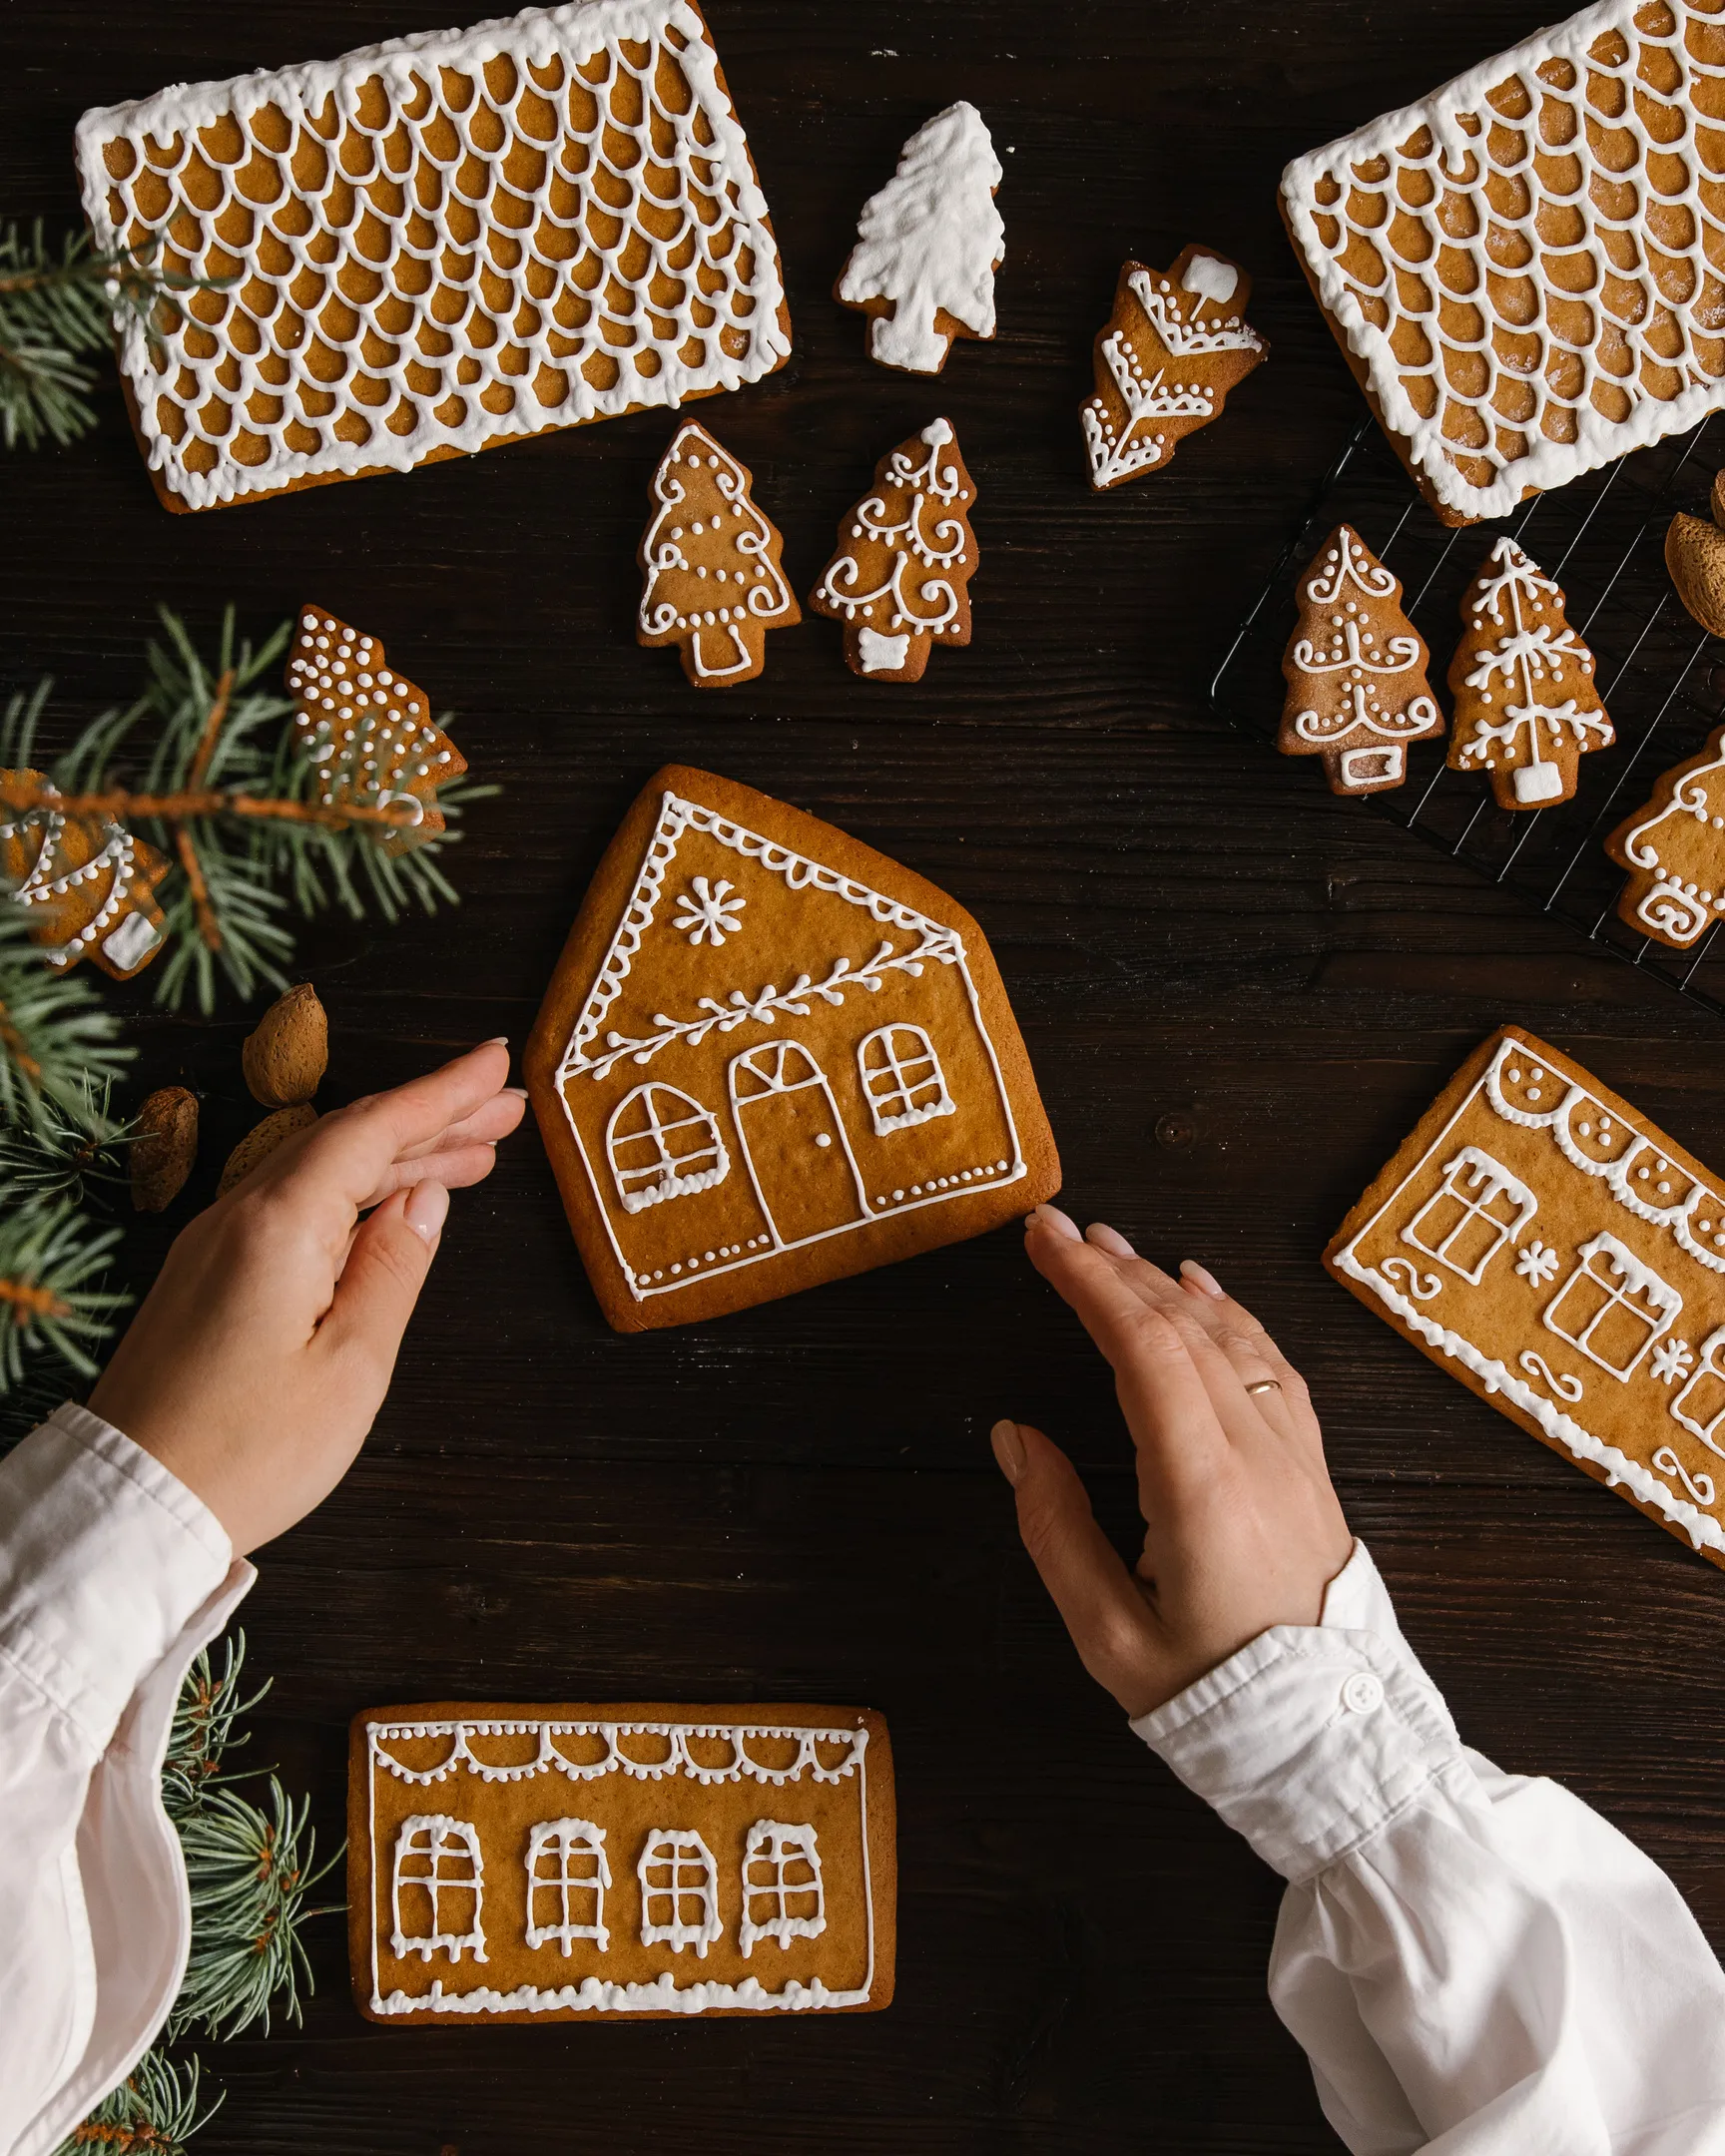 On the table are gingerbread in the form of walls and the roof of the house On the table is gingerbread in the form of walls and the house's roof. A woman is holding 1 side of the house. To the right of the frame are almond nuts. Christmas tree needles are visible in the foreground.